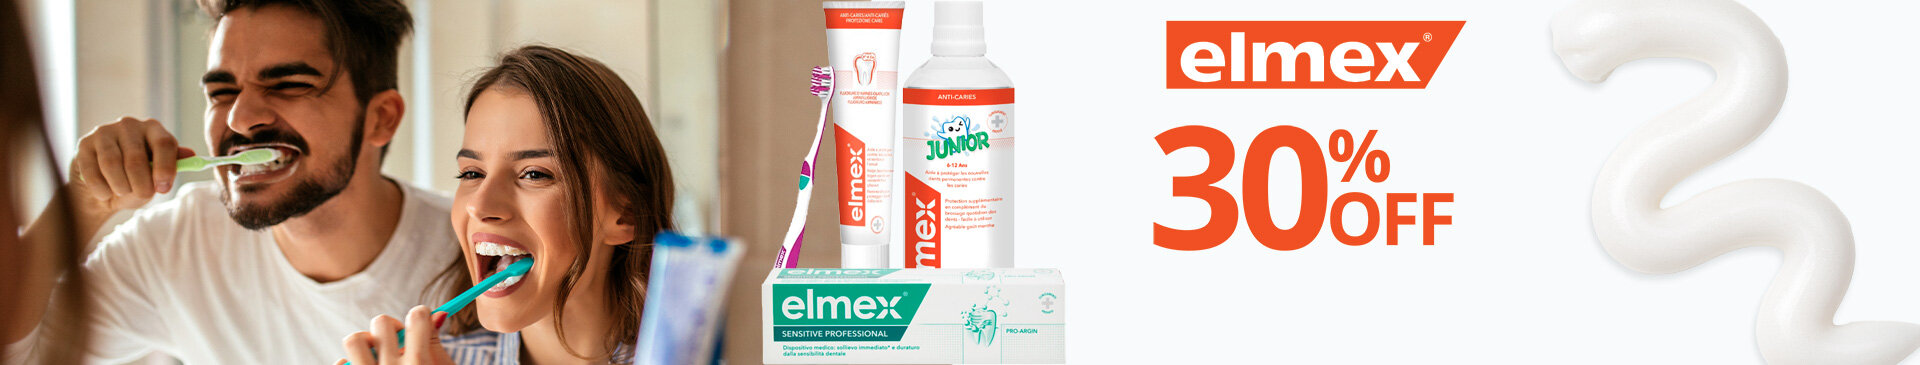 30% off on all the Elmex products